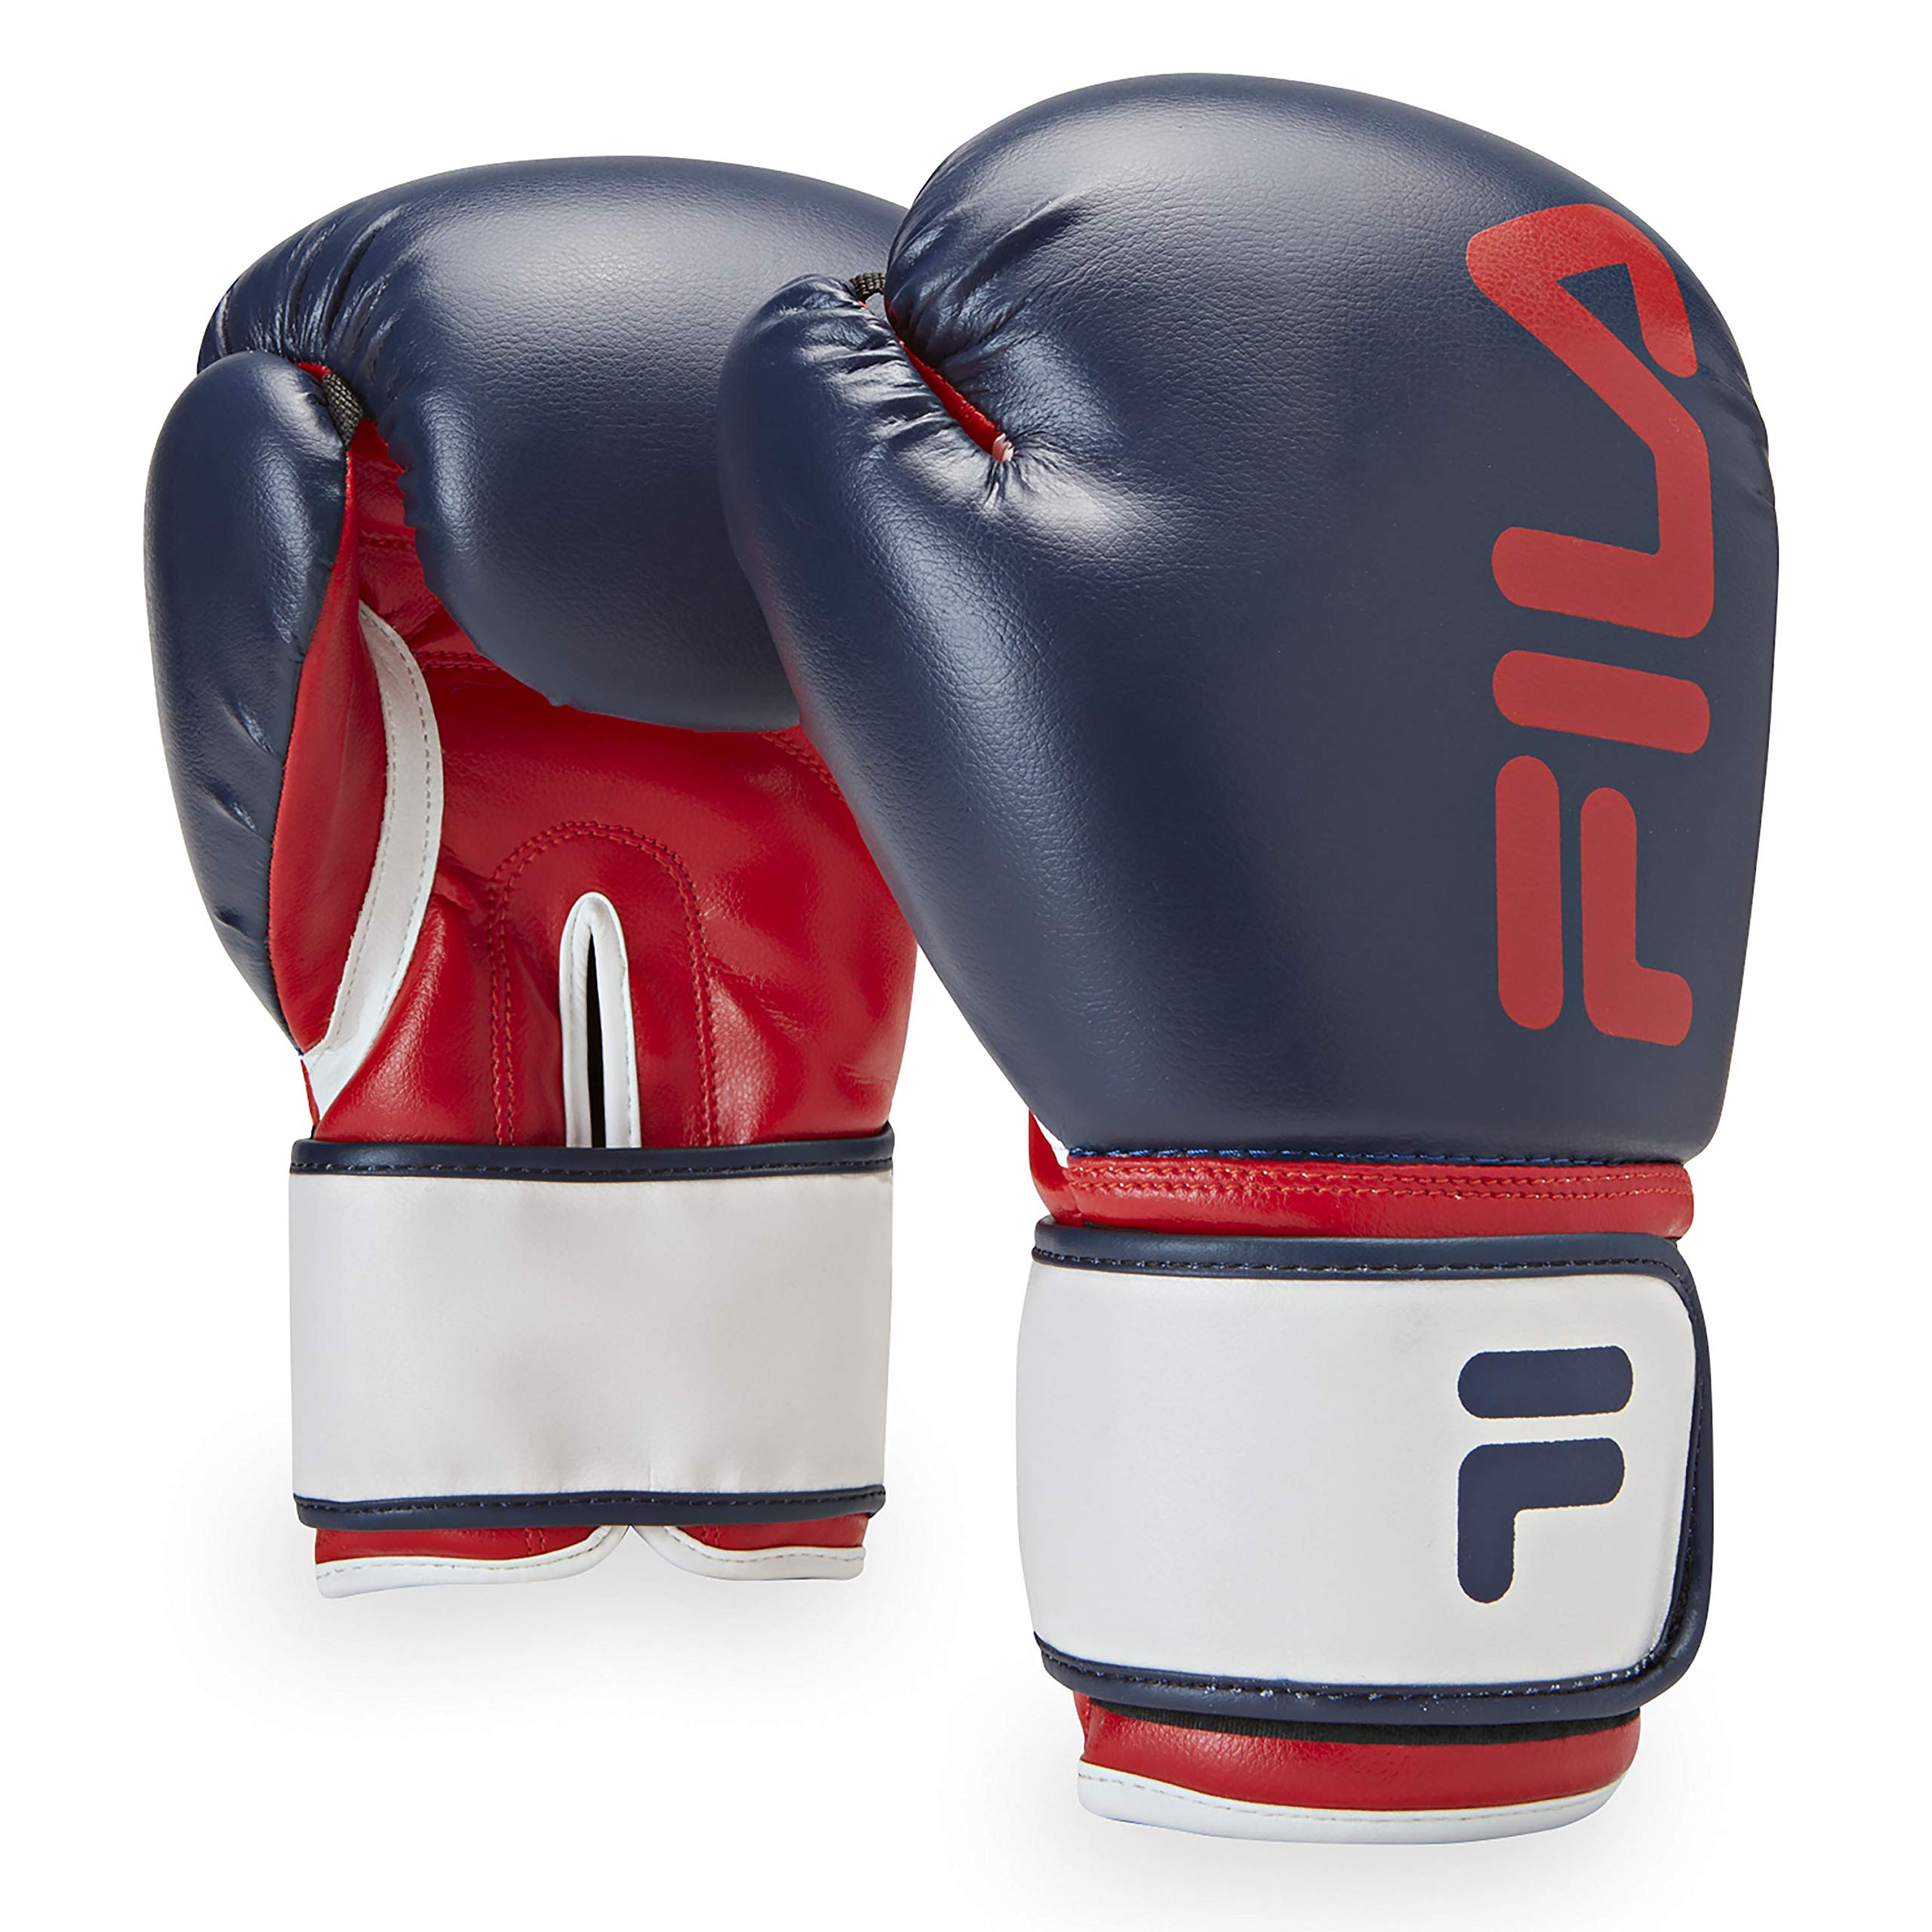 FILA Accessories unisex adult 12oz Boxing Gloves, Victory (Navy), US